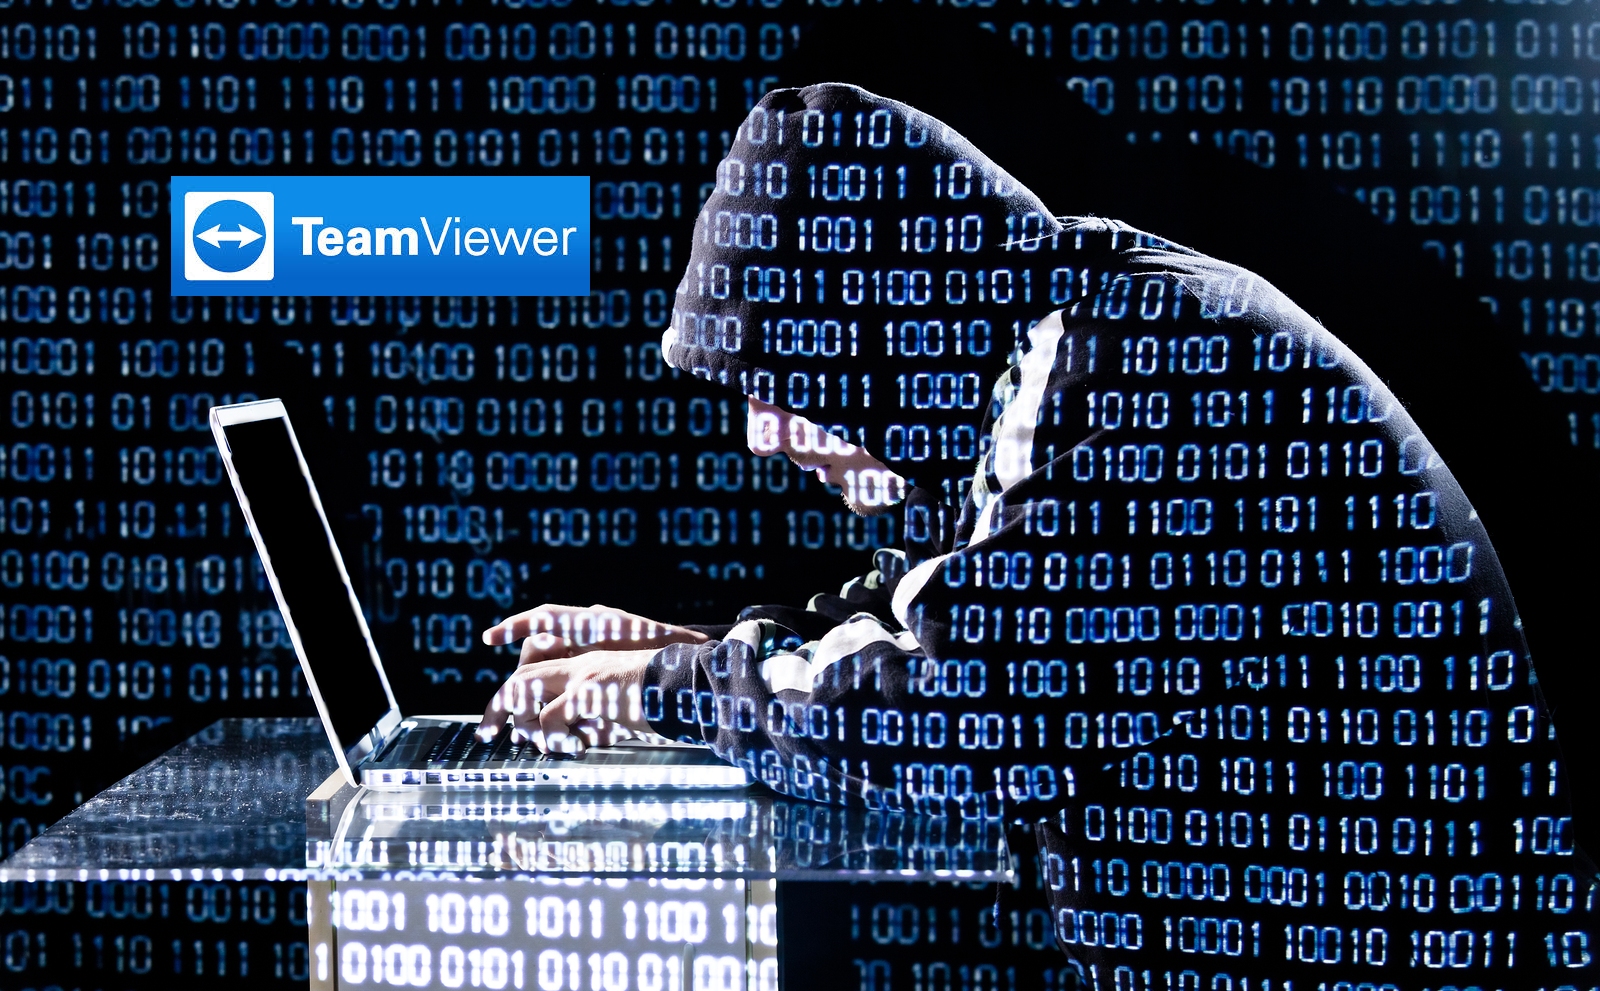 TeamViewer fixes a flaw that allows users sharing a desktop session to gain control of the other’s PC